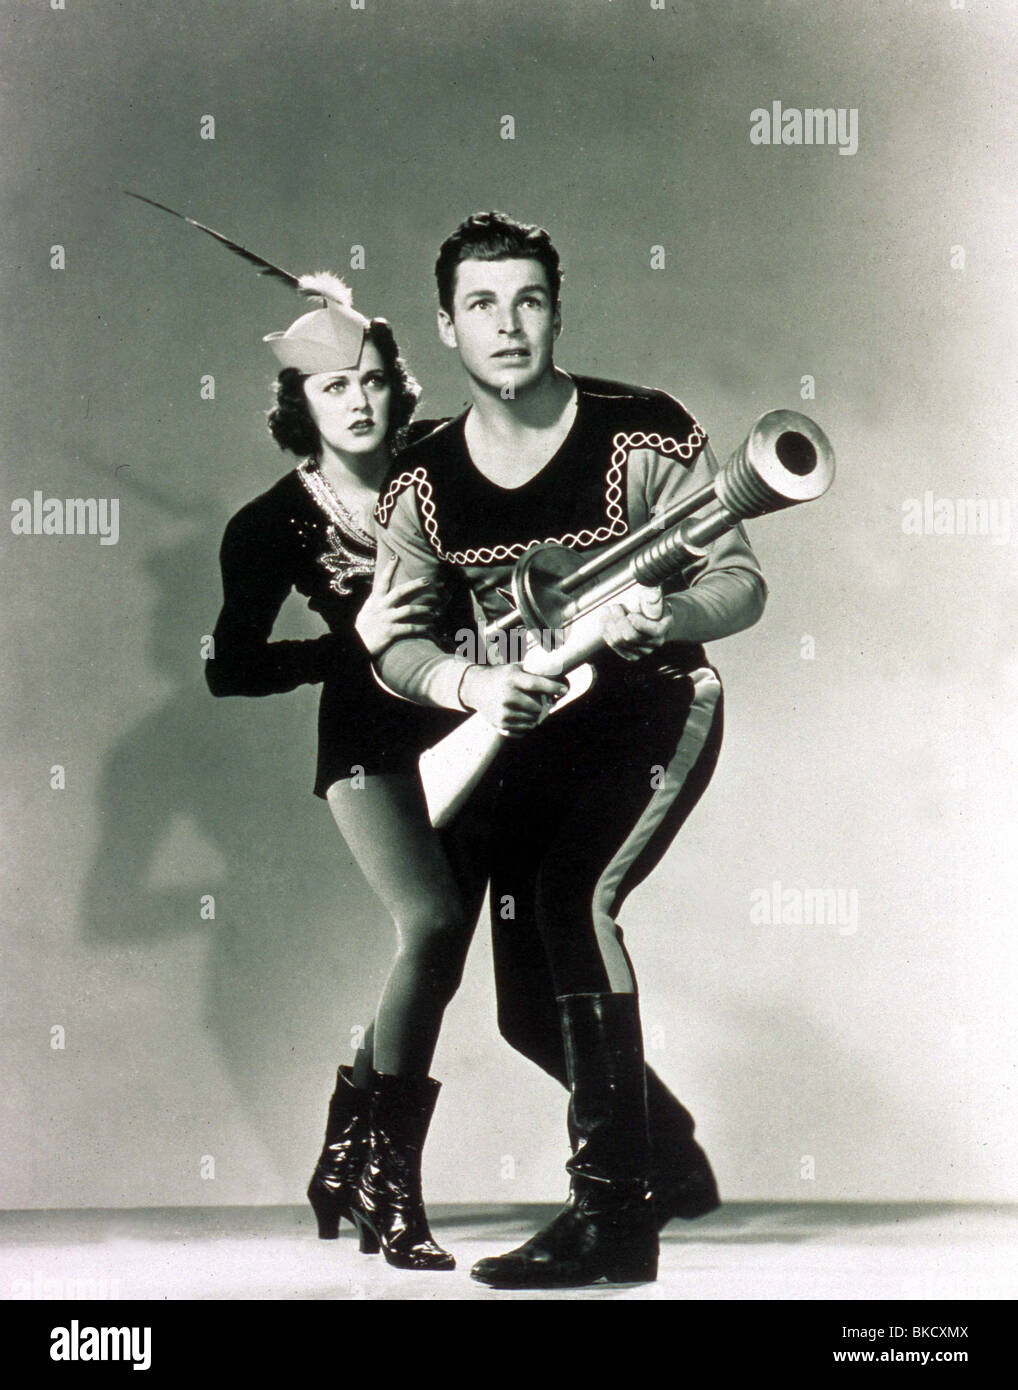 FLASH GORDON'S TRIP TO MARS (1936) JEAN ROGERS, BUSTER CRABBE FGTM 001  Stock Photo - Alamy